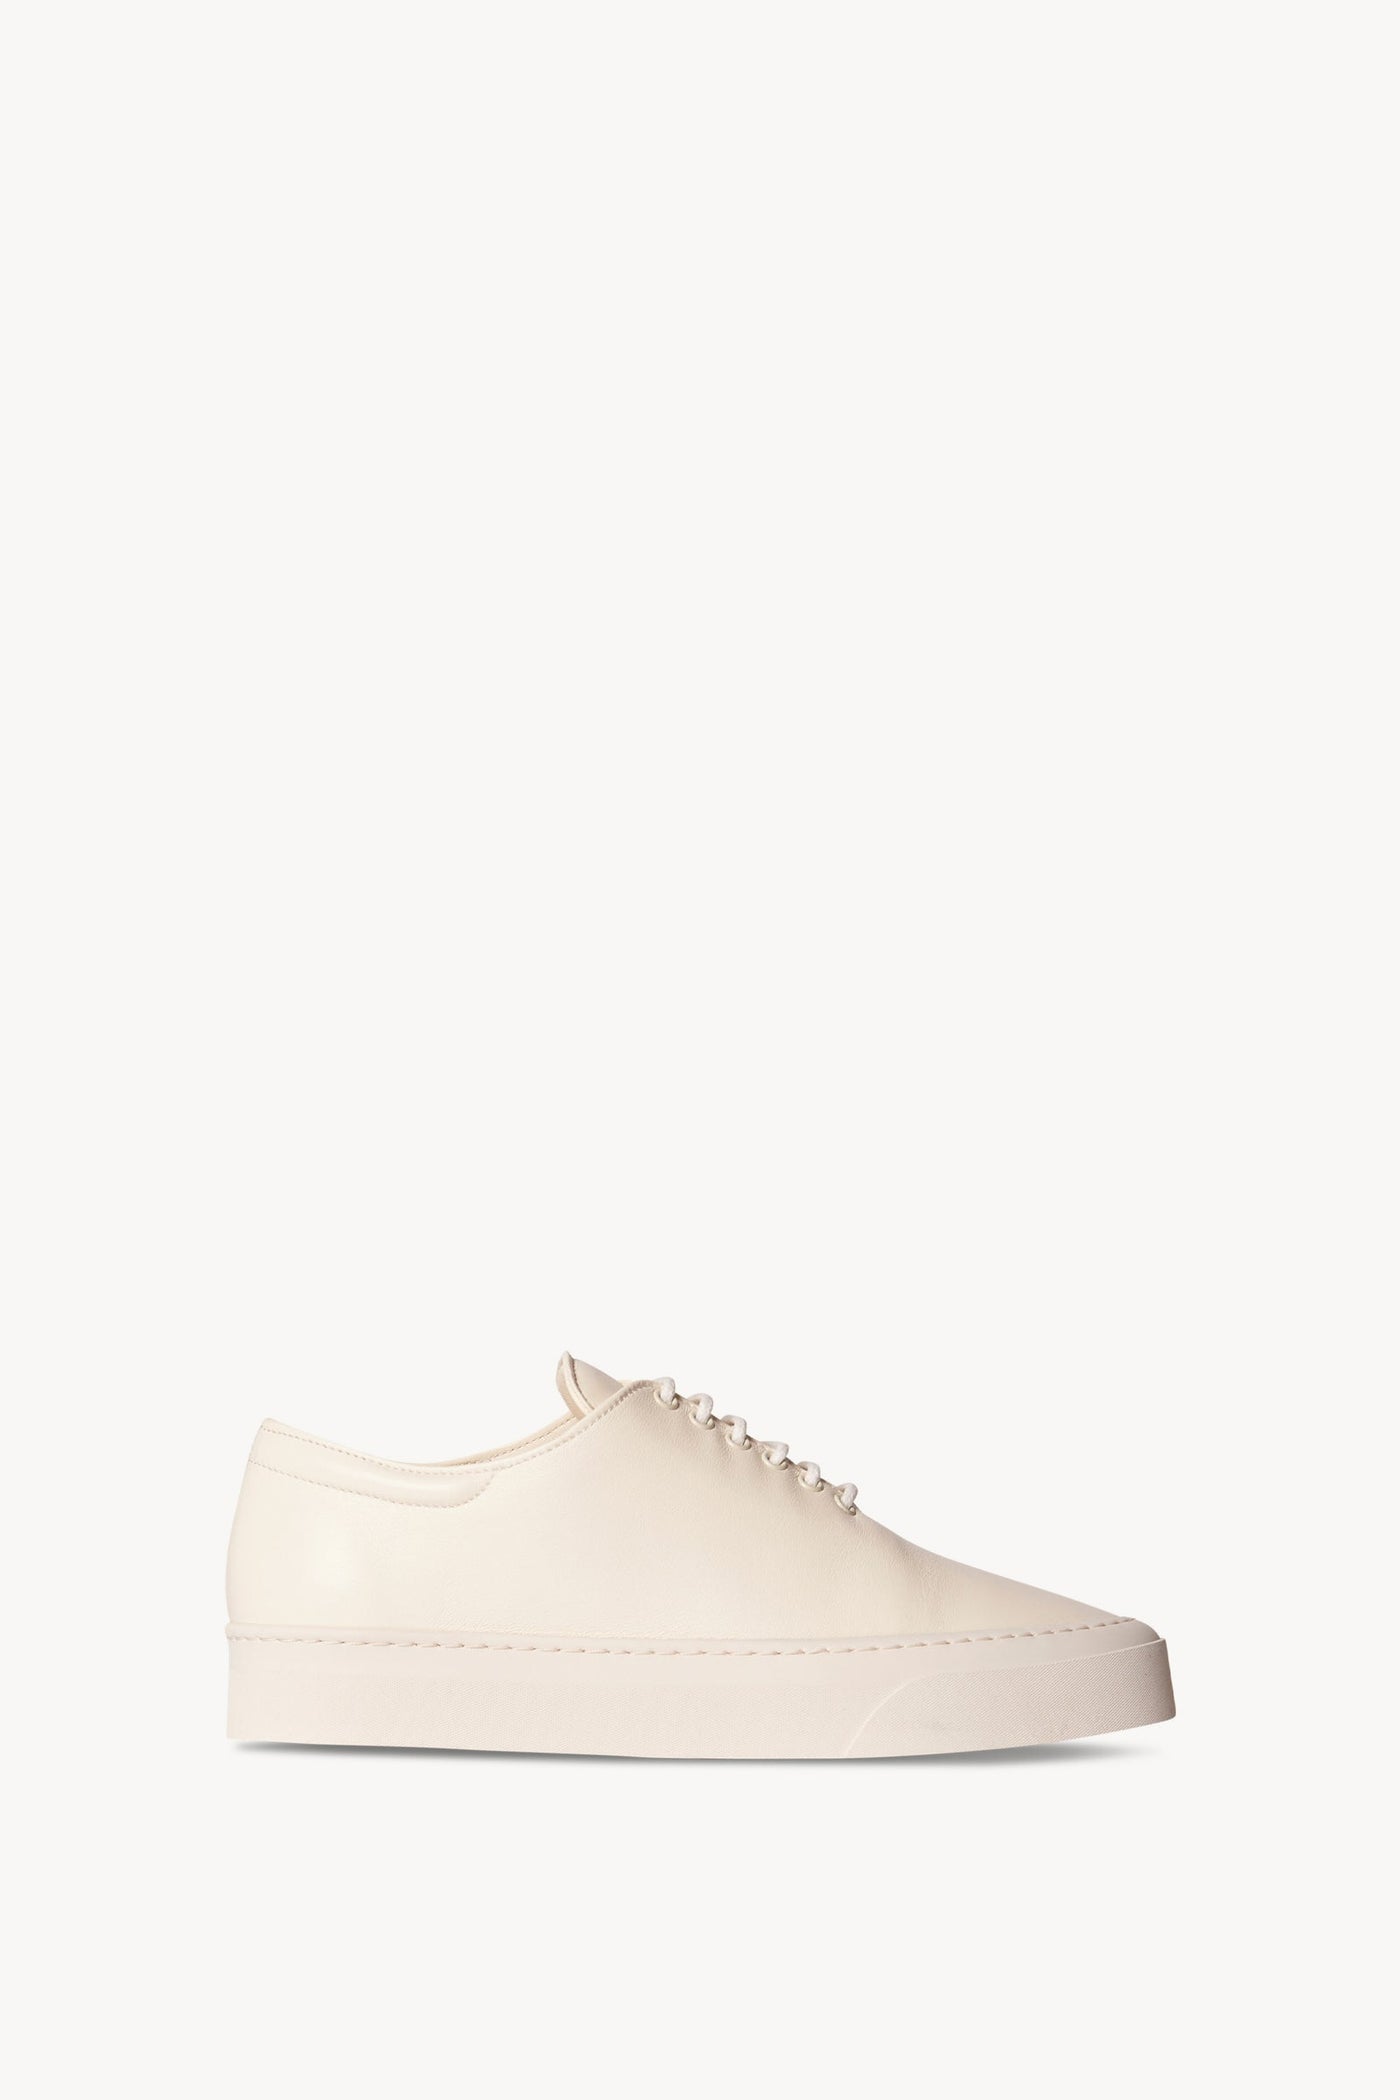 the-row-marie-h-lace-up-sneaker-amarees